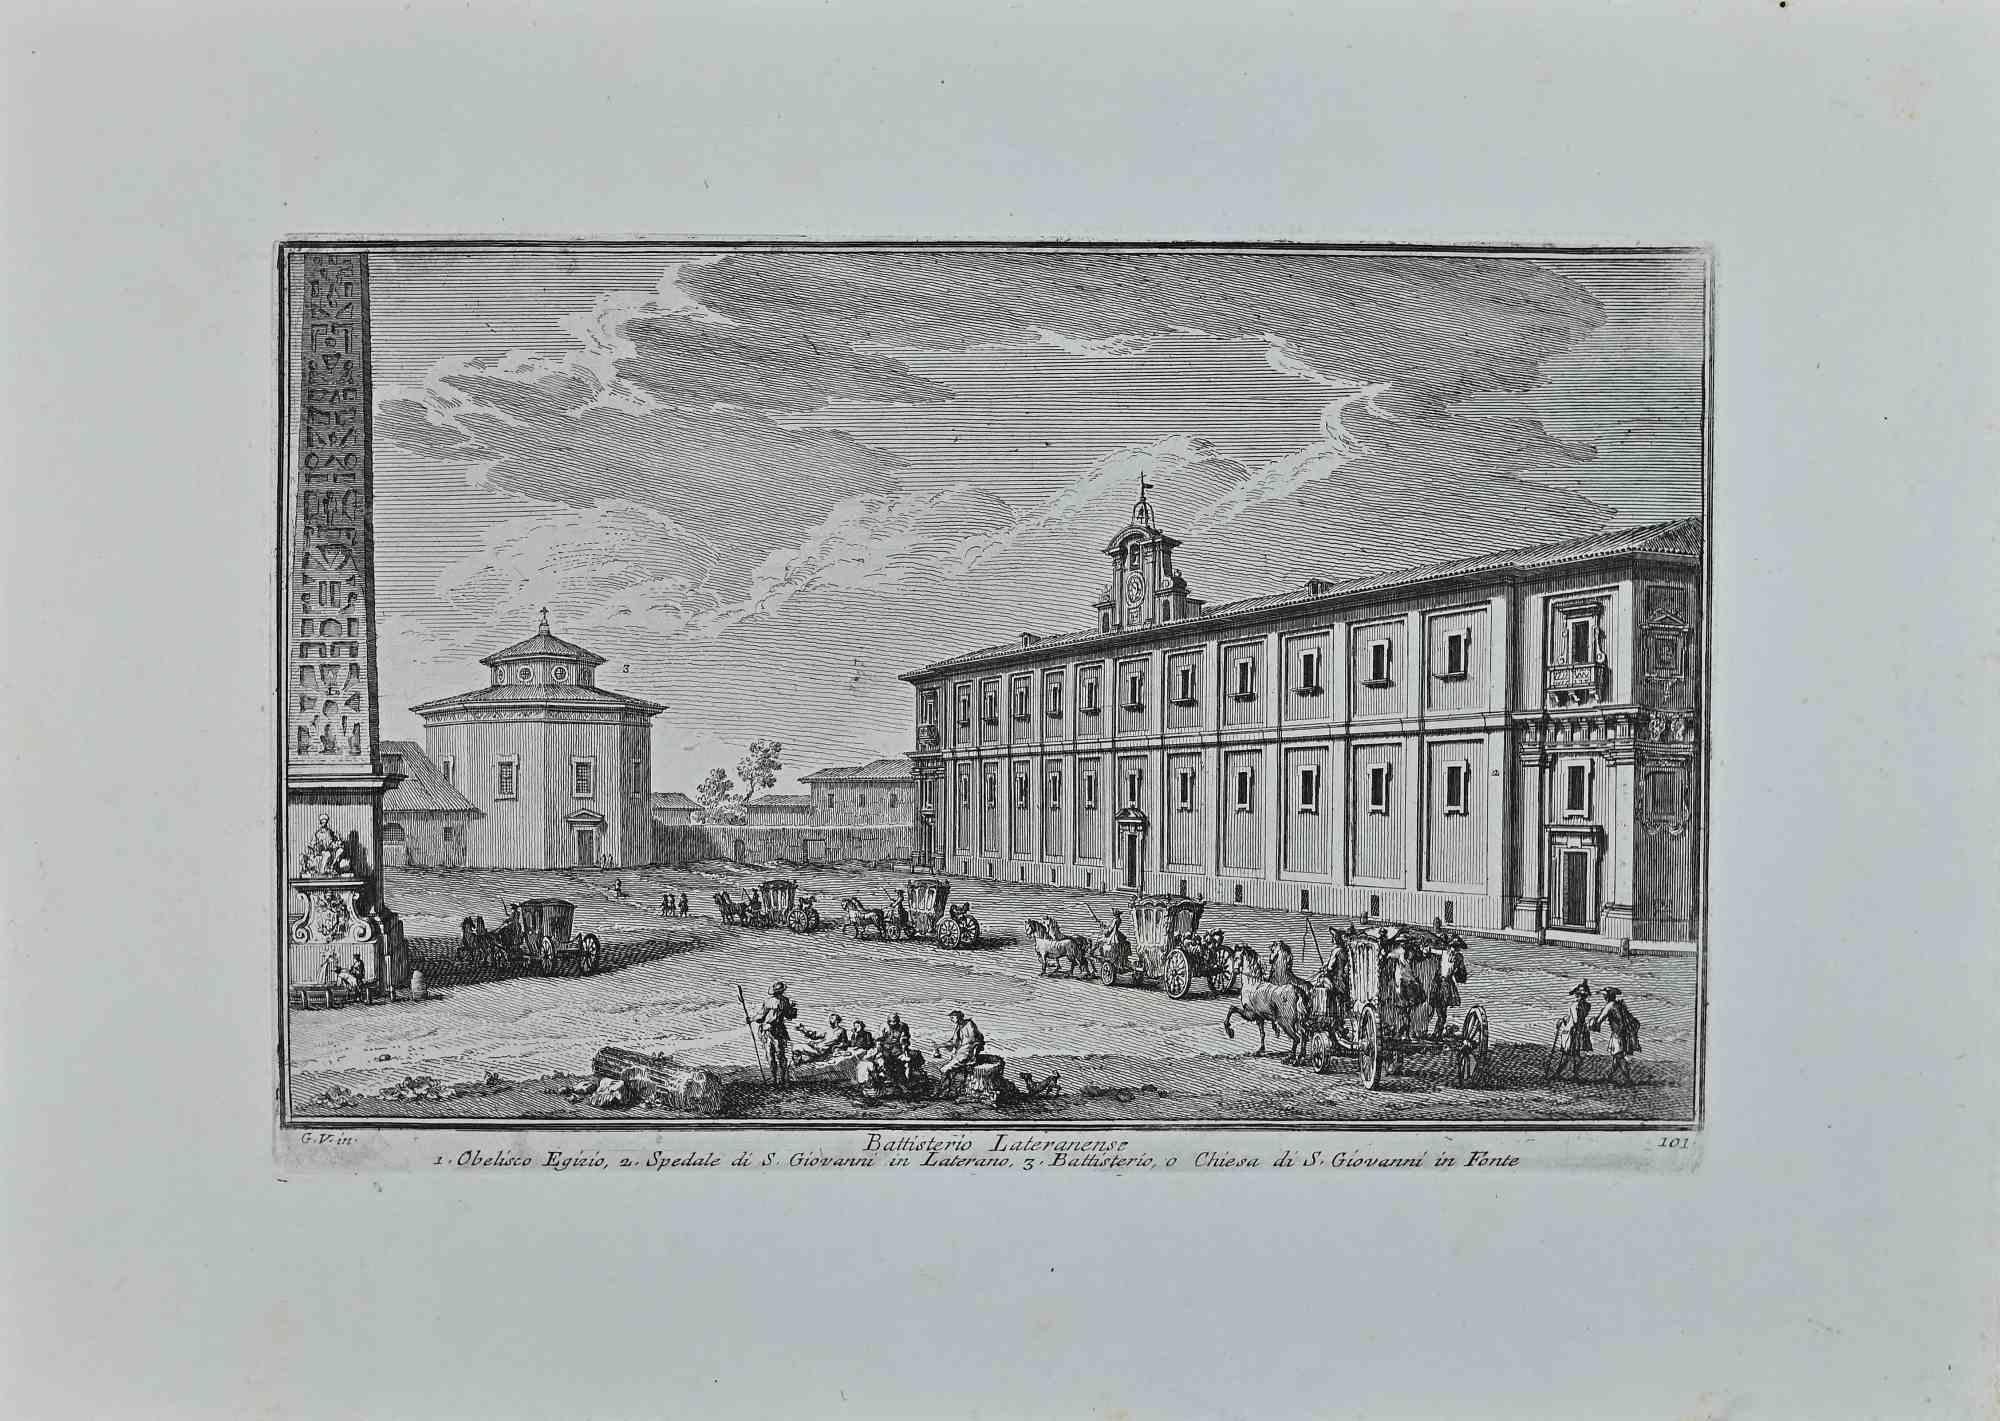 Battistero Lateranese is an original etching of the Late 18th century realized by Giuseppe Vasi.

Signed and titled on plate lower margin. 

Good conditions.

Giuseppe Vasi  (Corleone,1710 - Rome, 1782) was an engraver, architect, and landscape